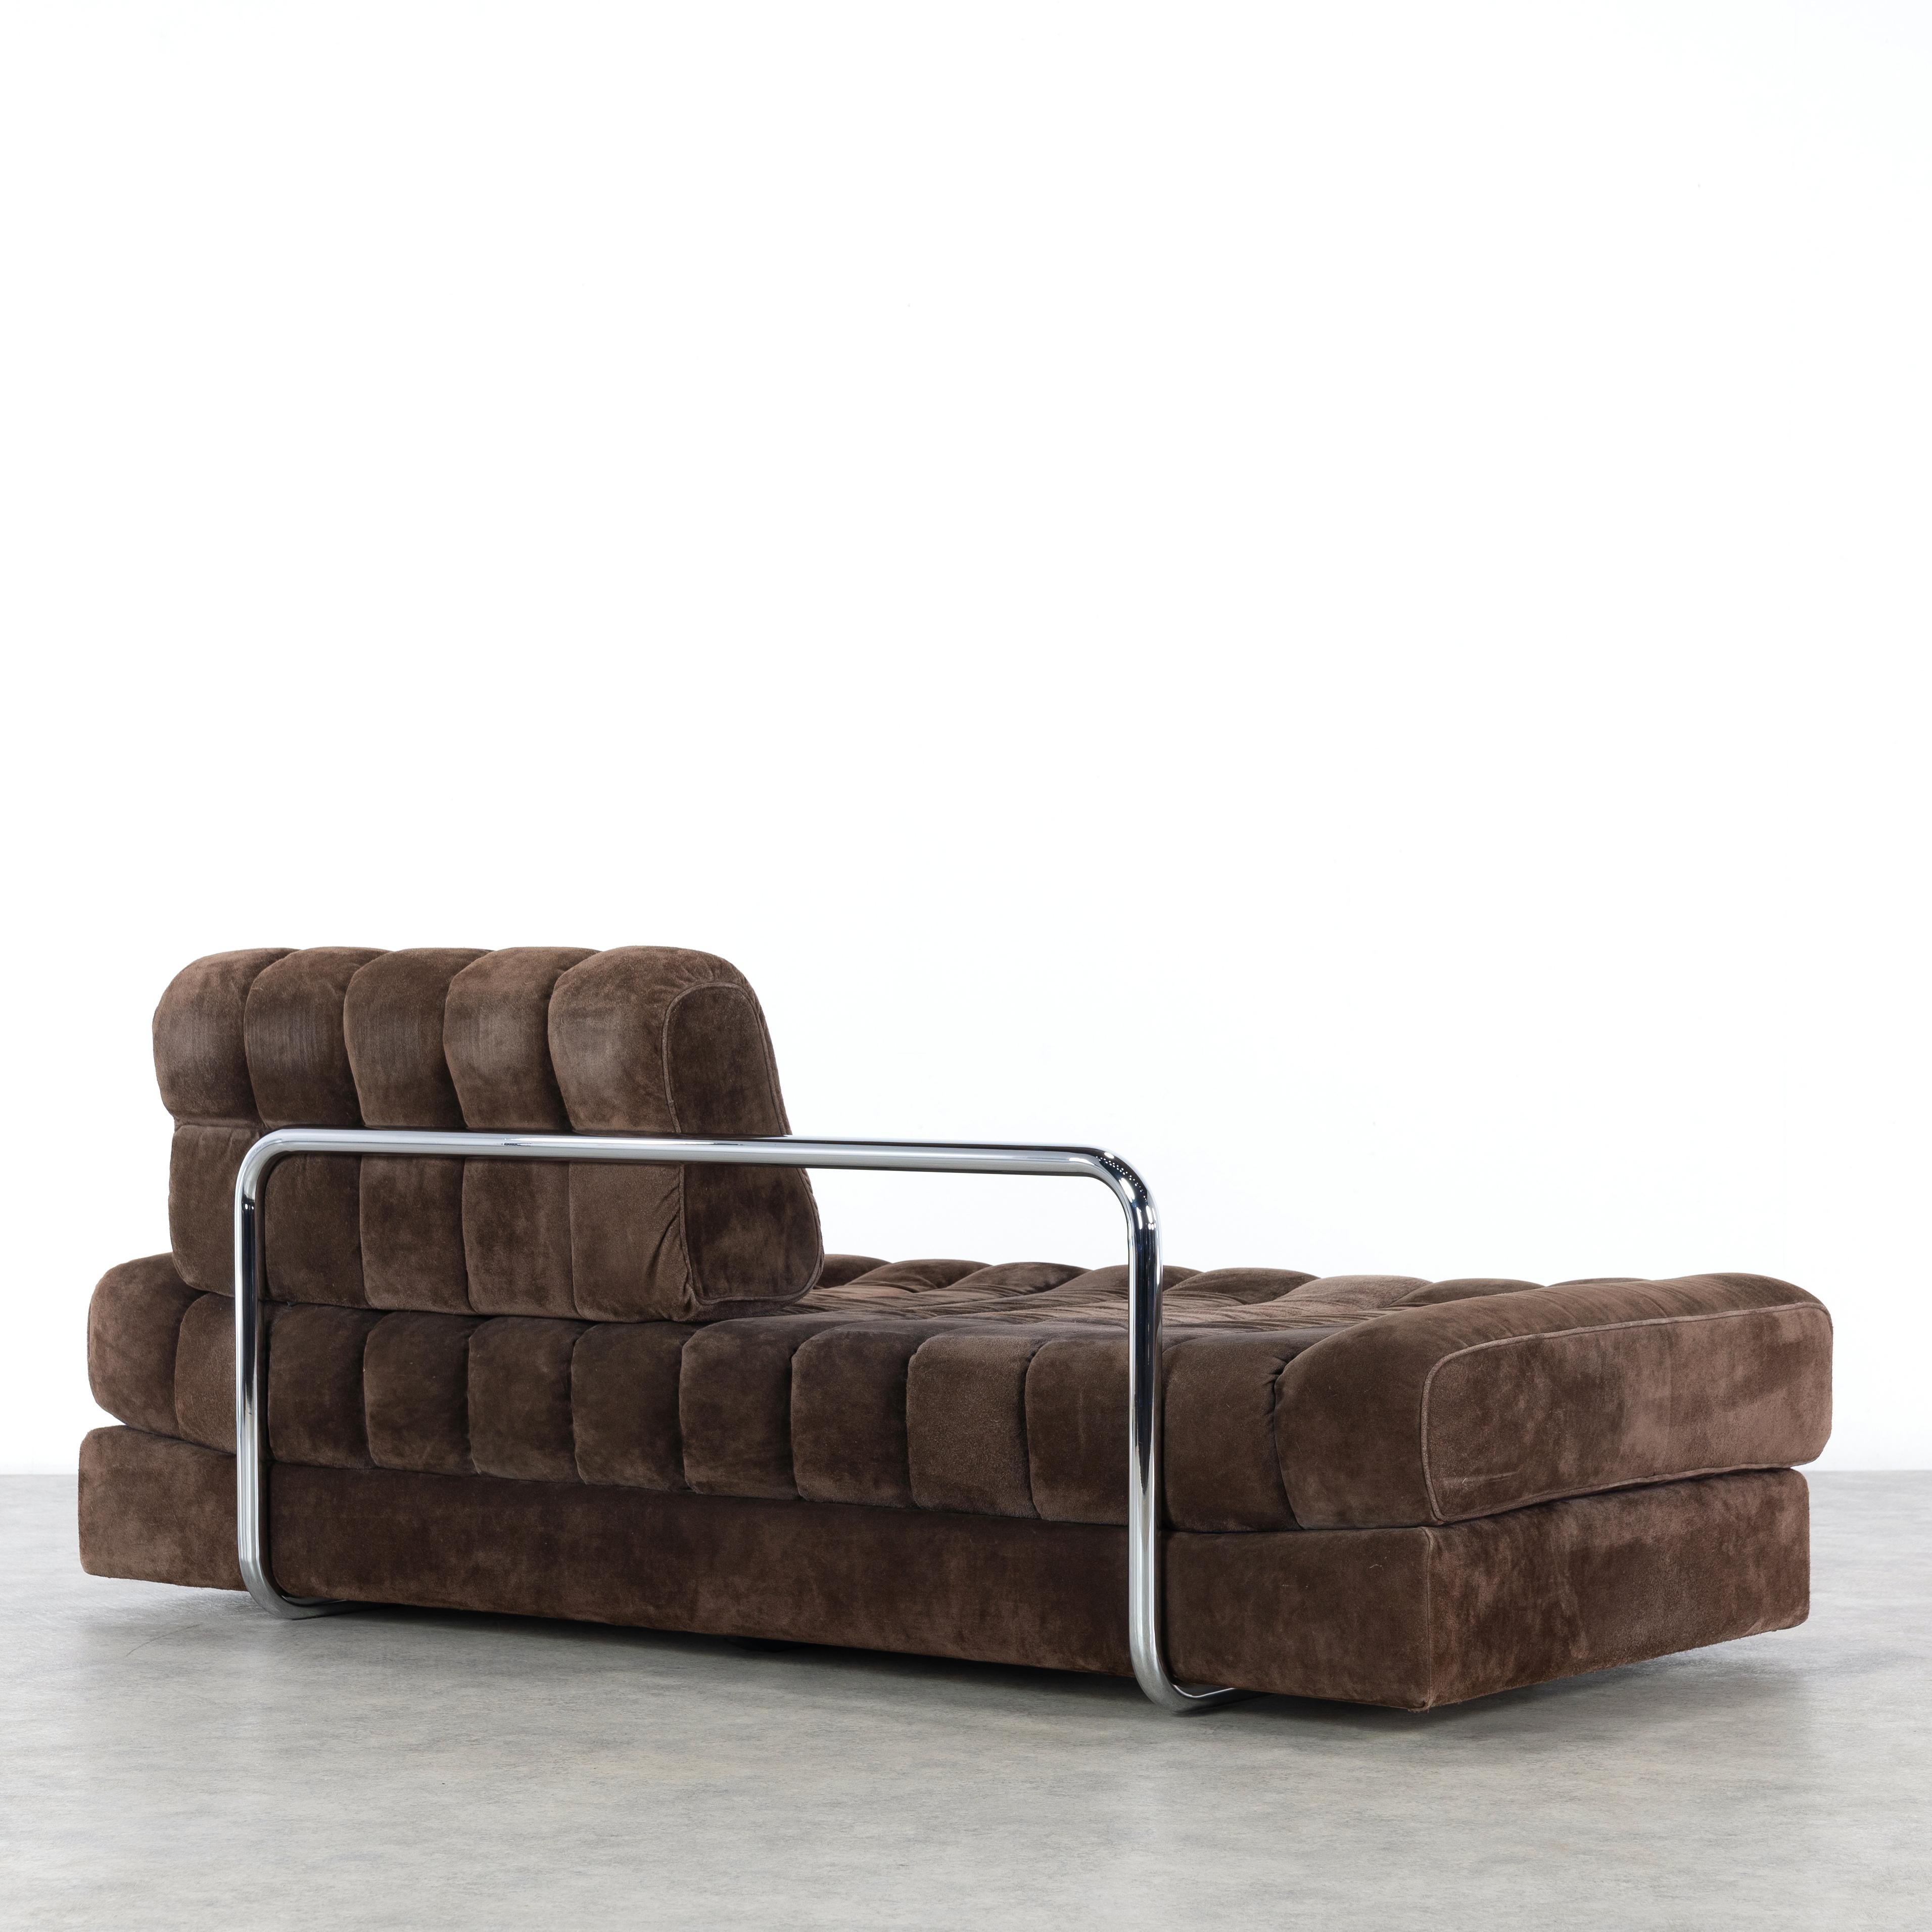 This daybed DS 85 was manufactured in the 1960s by De Sede in Switzerland. This versatile sofa or loveseat can be folded up to a double bed. This piece is upholstered with brown nubuck leather. Three patchwork cushions are also included in the